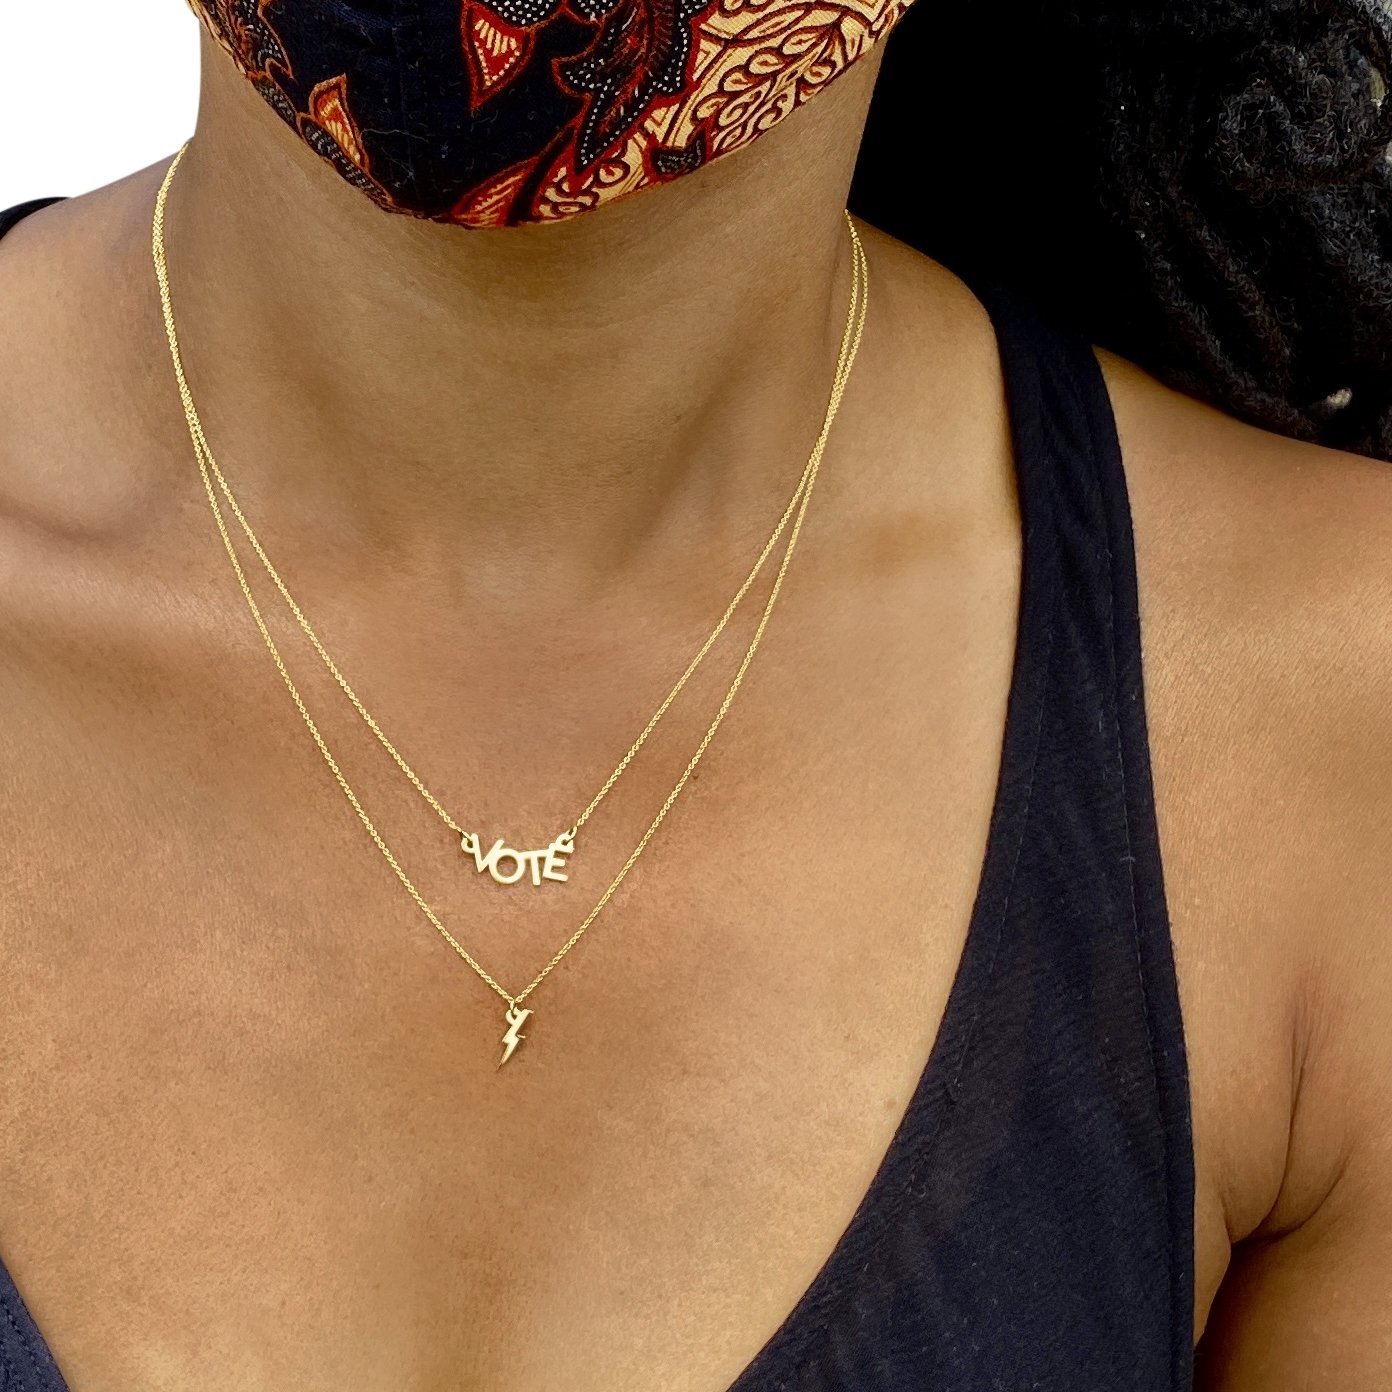 Let’s VOTE Necklace in 14k Gold - Mazi New York-jewelry